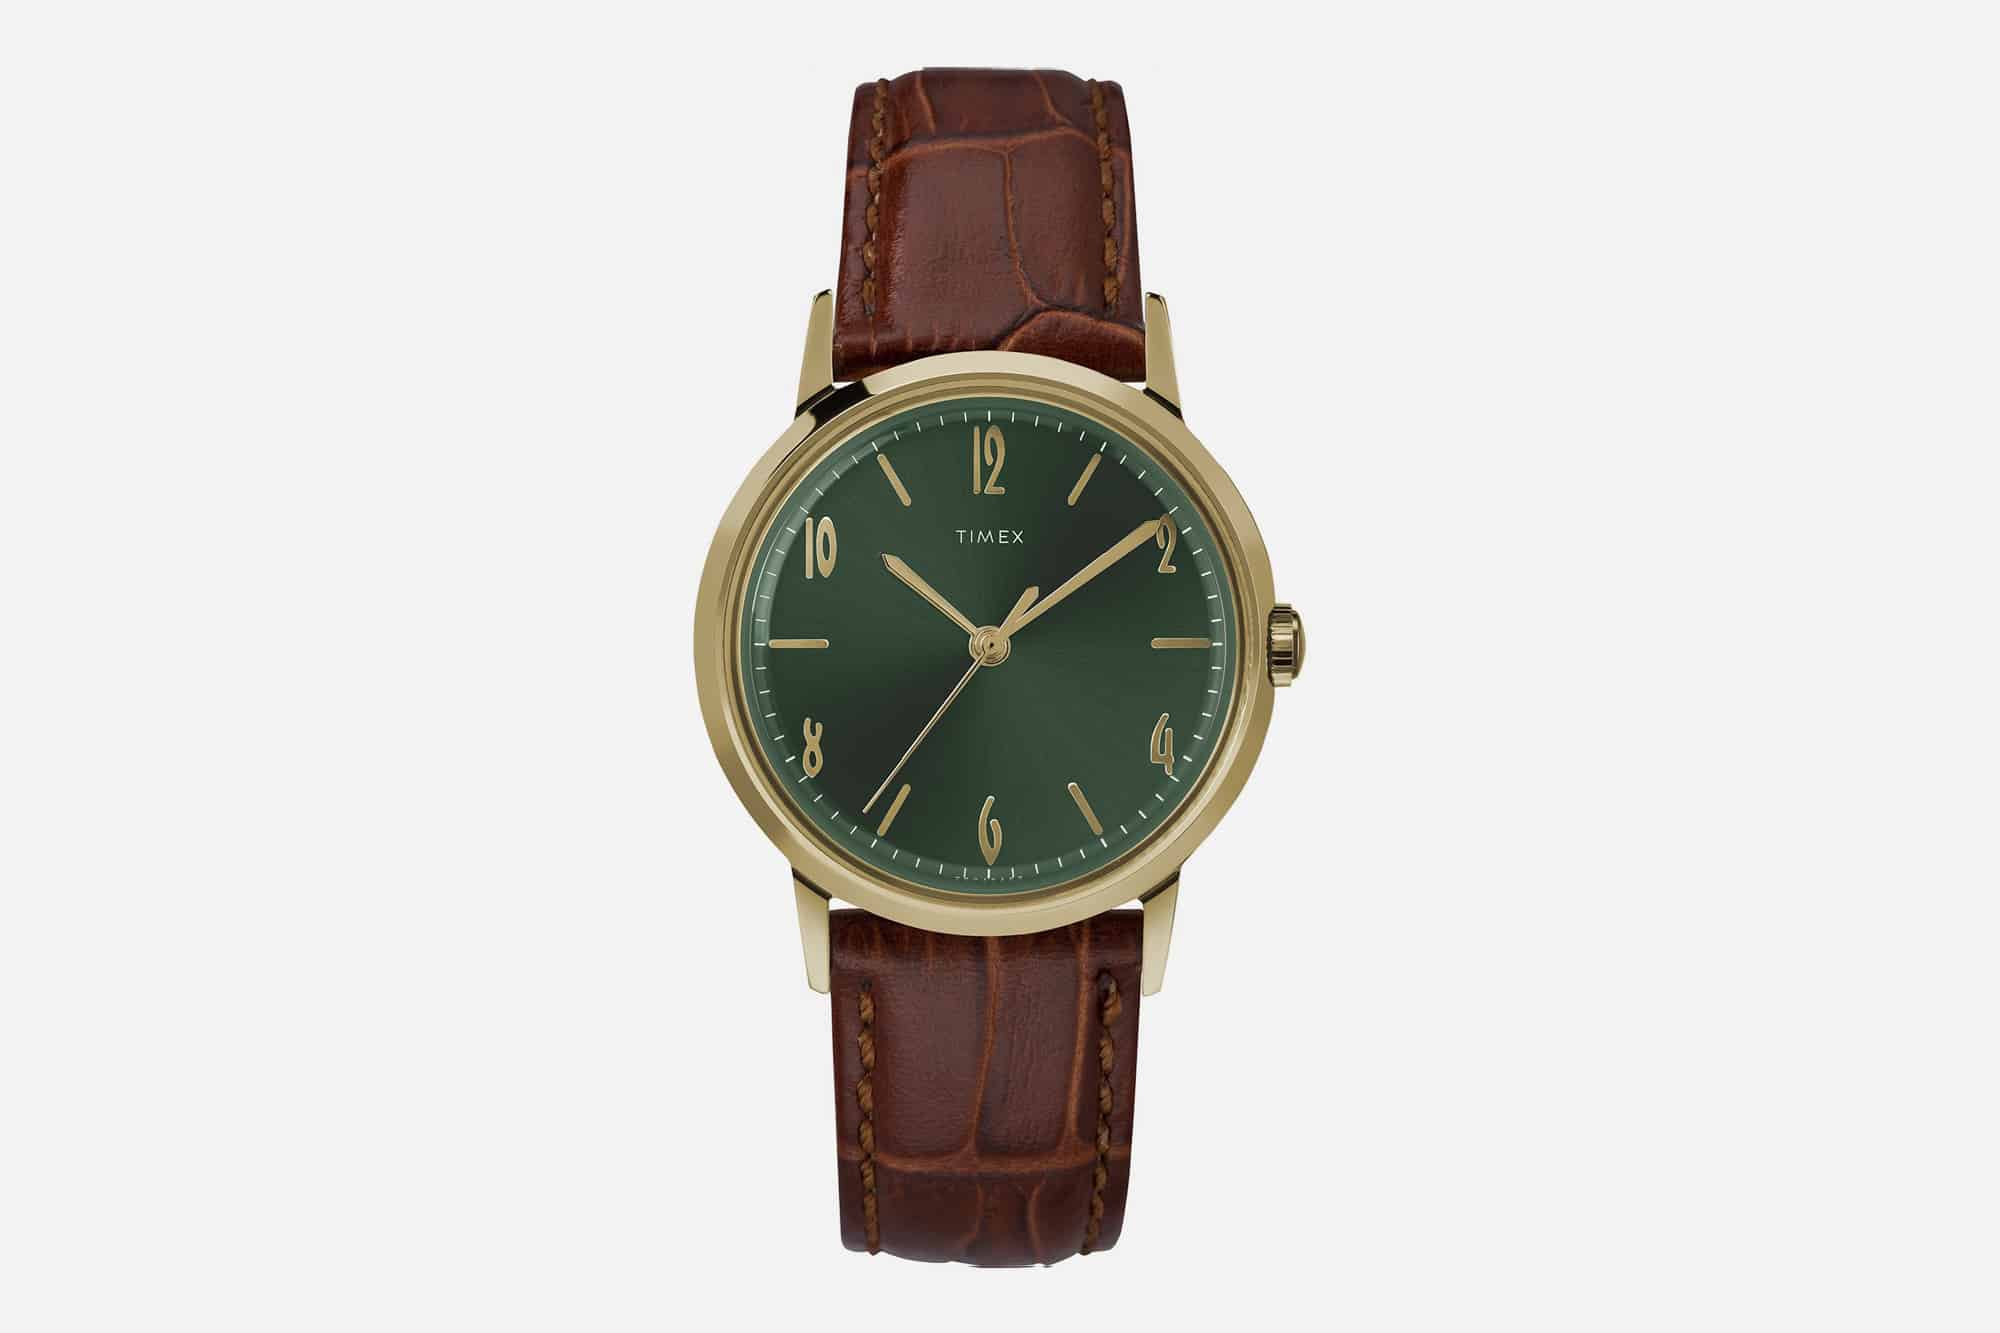 The Todd Snyder x Timex Marlin in Olive is the Best One Yet